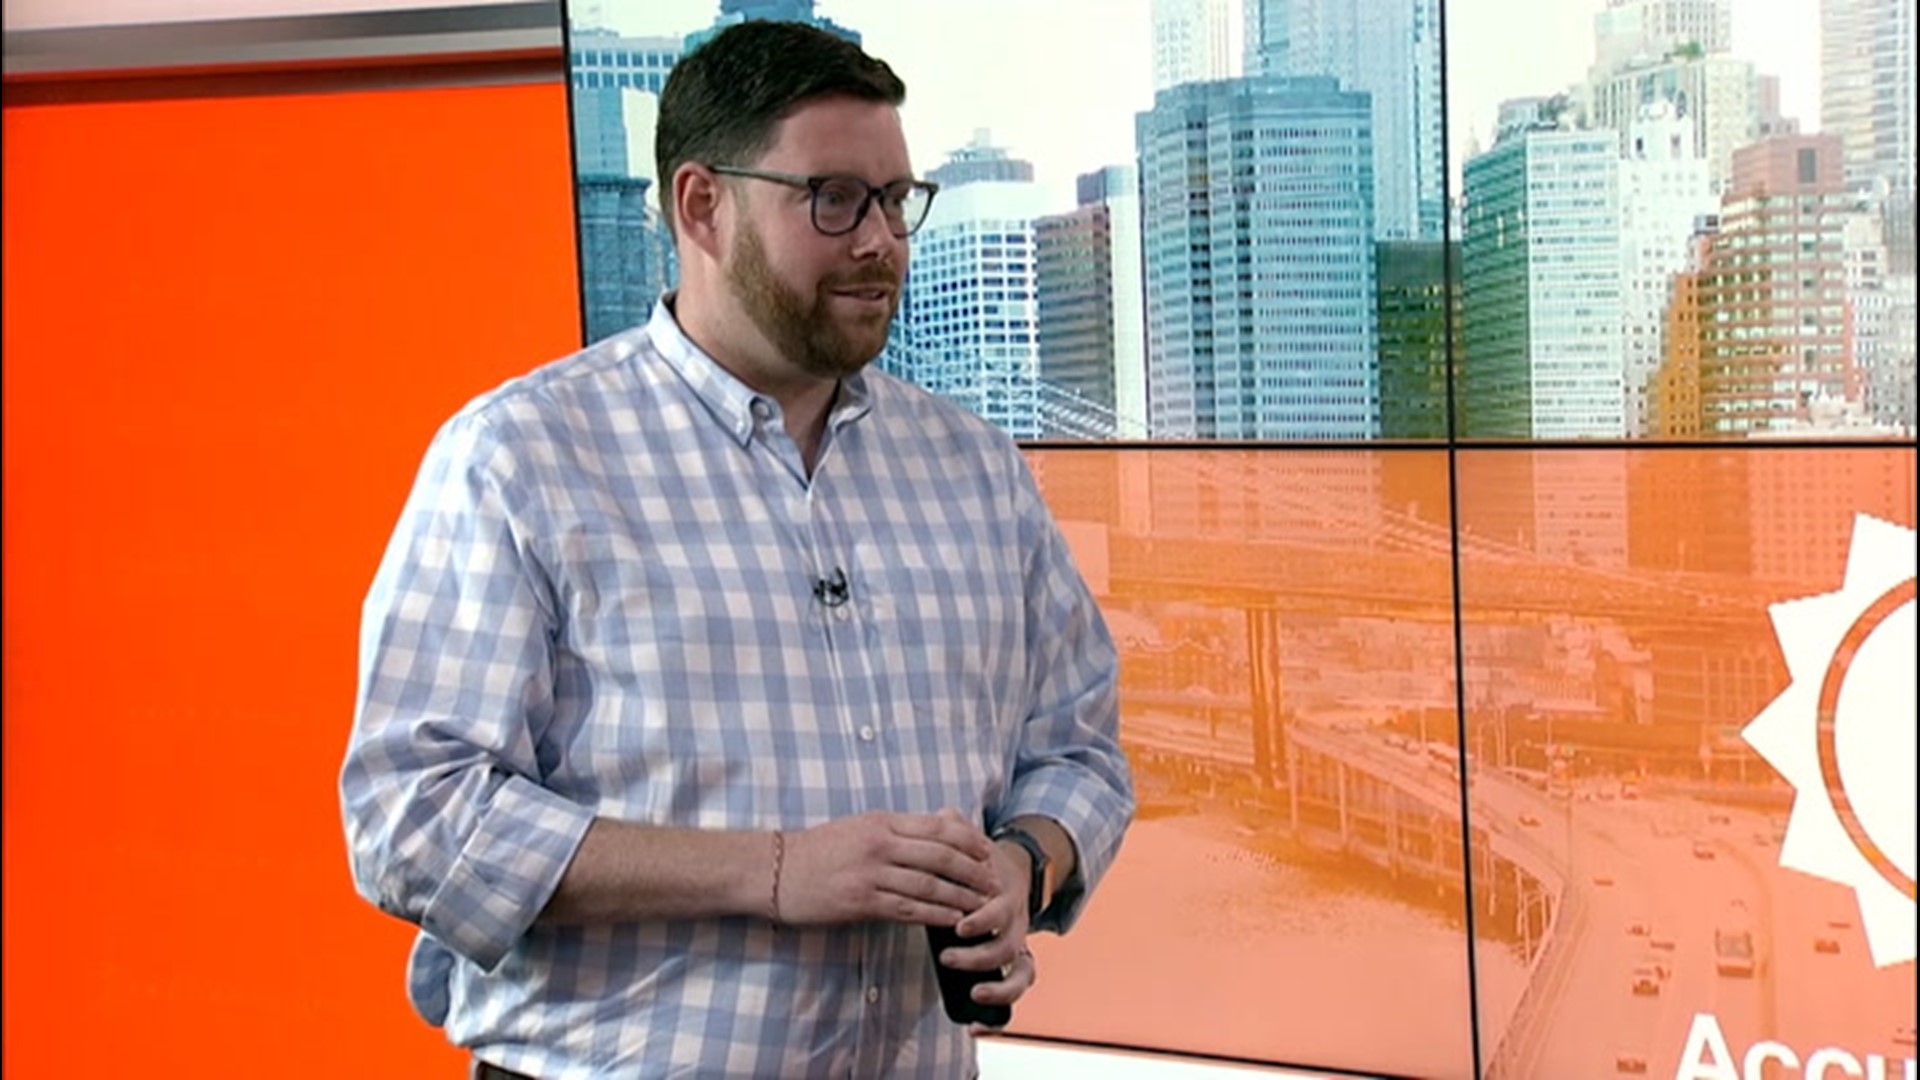 Jeremy Godwin of Verizon spoke with AccuWeather recently on how his company helps friends and family stay connected even after severe weather.